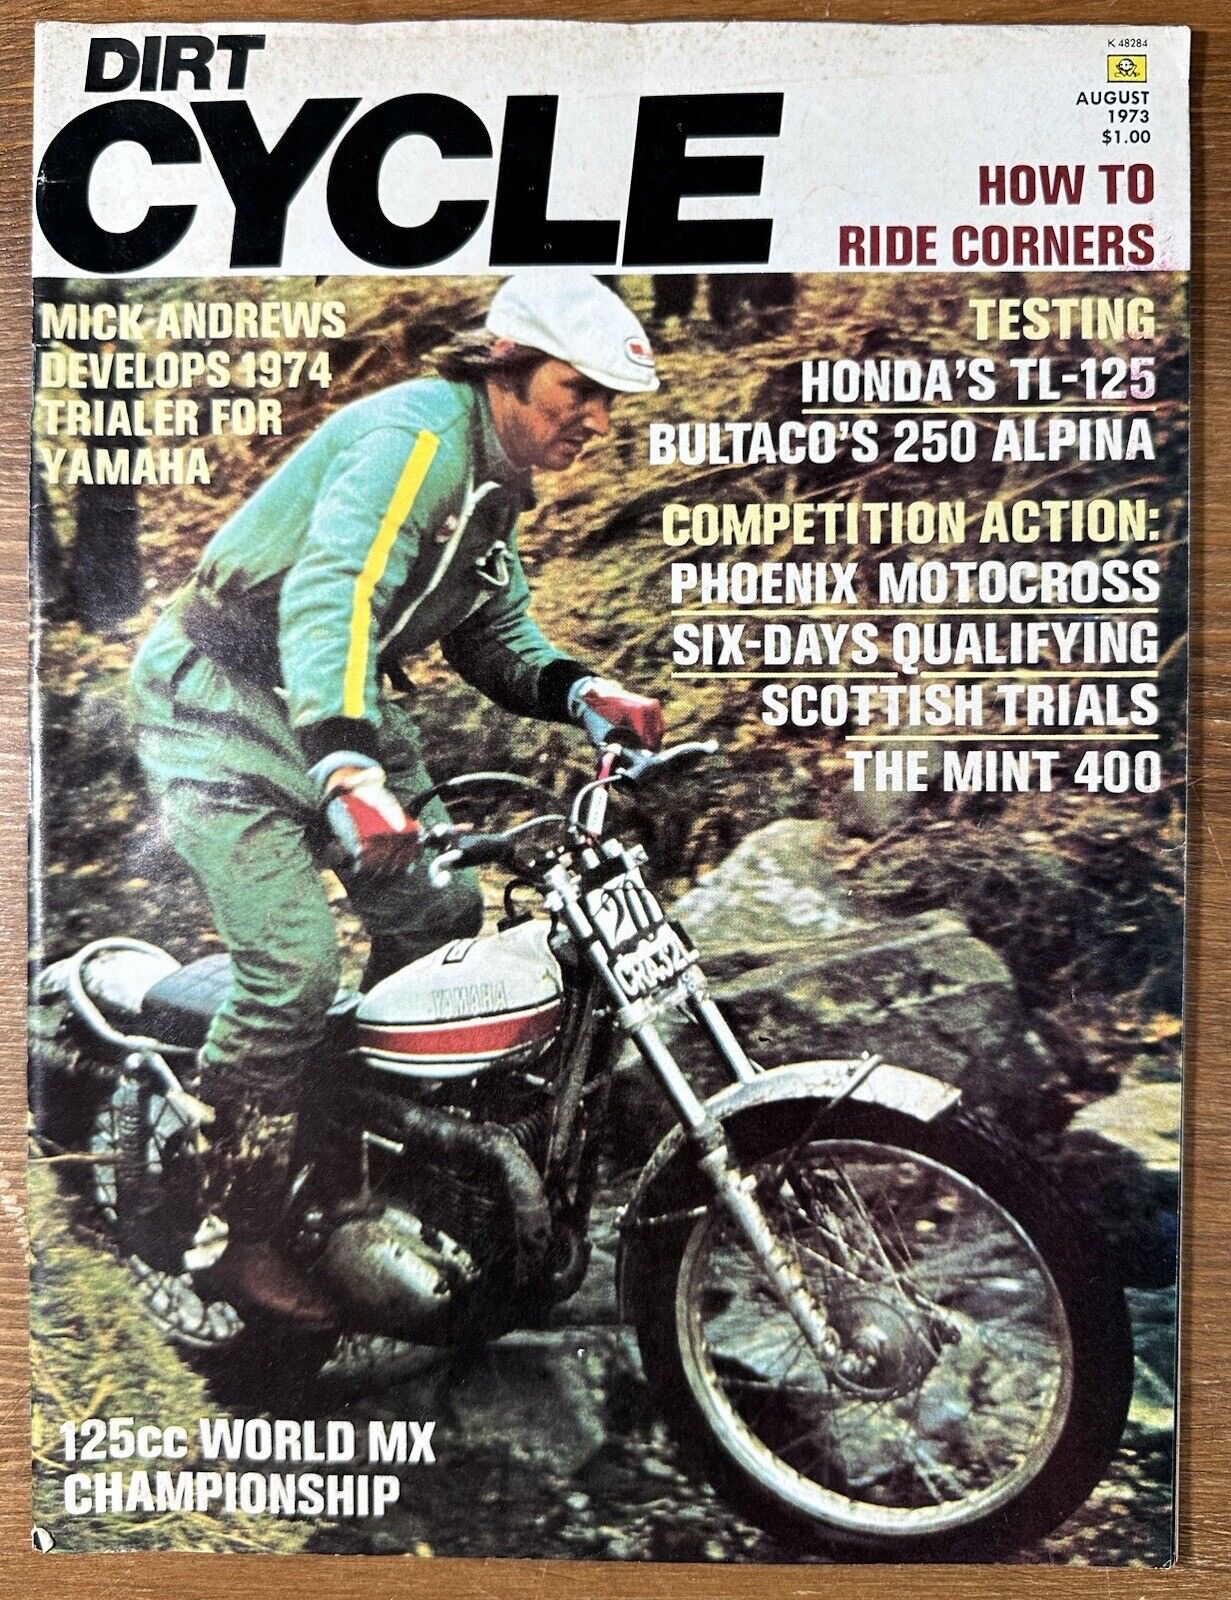 Vintage Dirt Cycle Magazine August 1973 Honda TL-125 Motorcycle Motocross Action